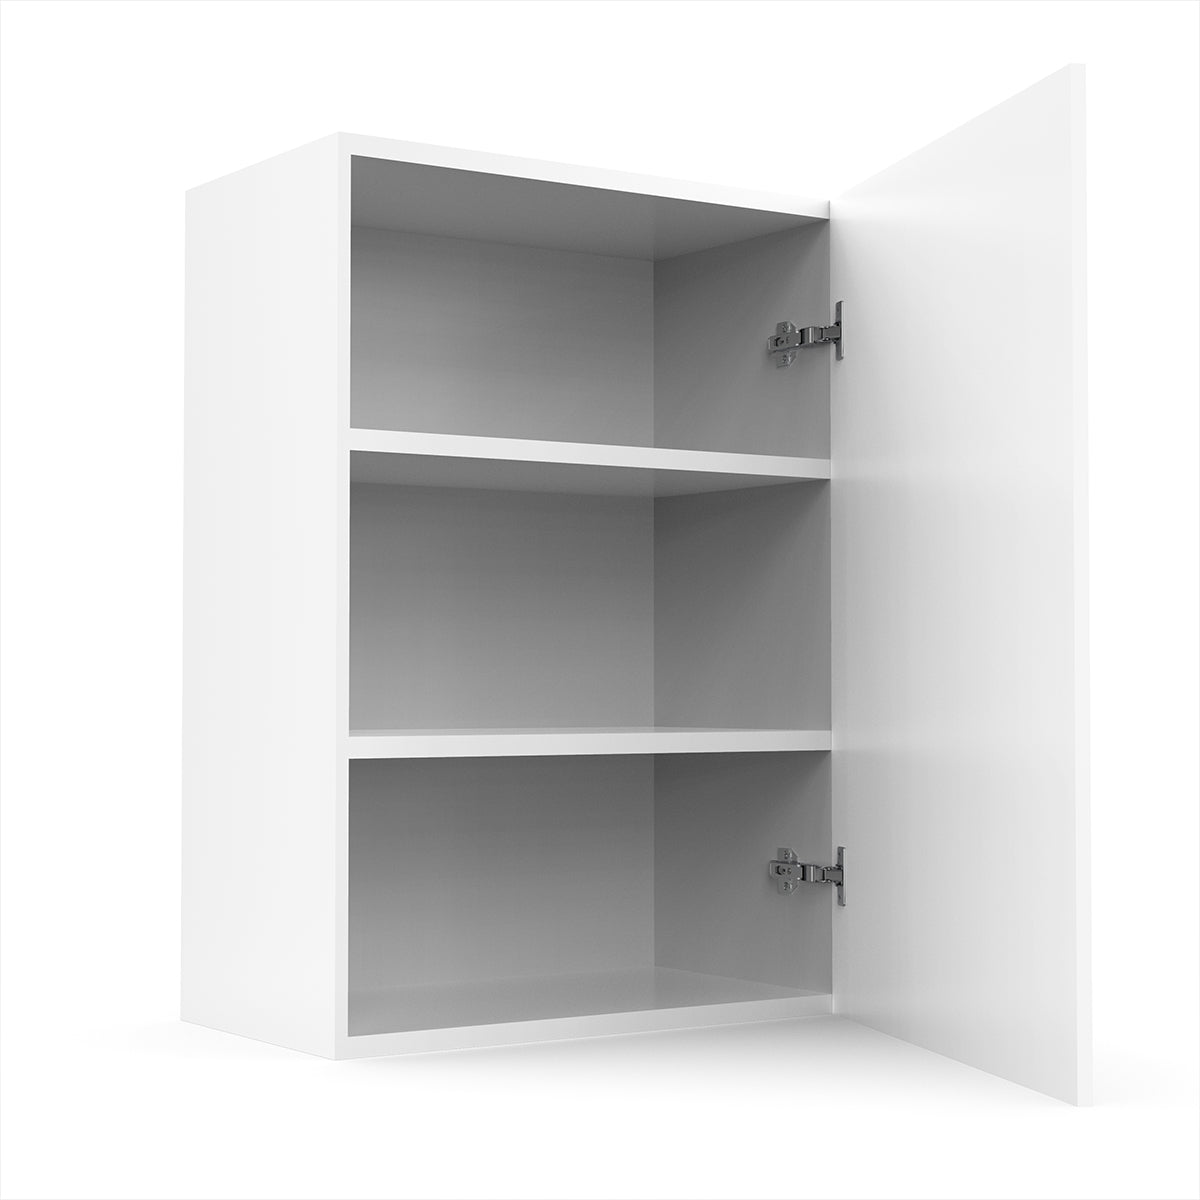 RTA - Glossy White - Single Door Wall Cabinets | 21"W x 30"H x 12"D